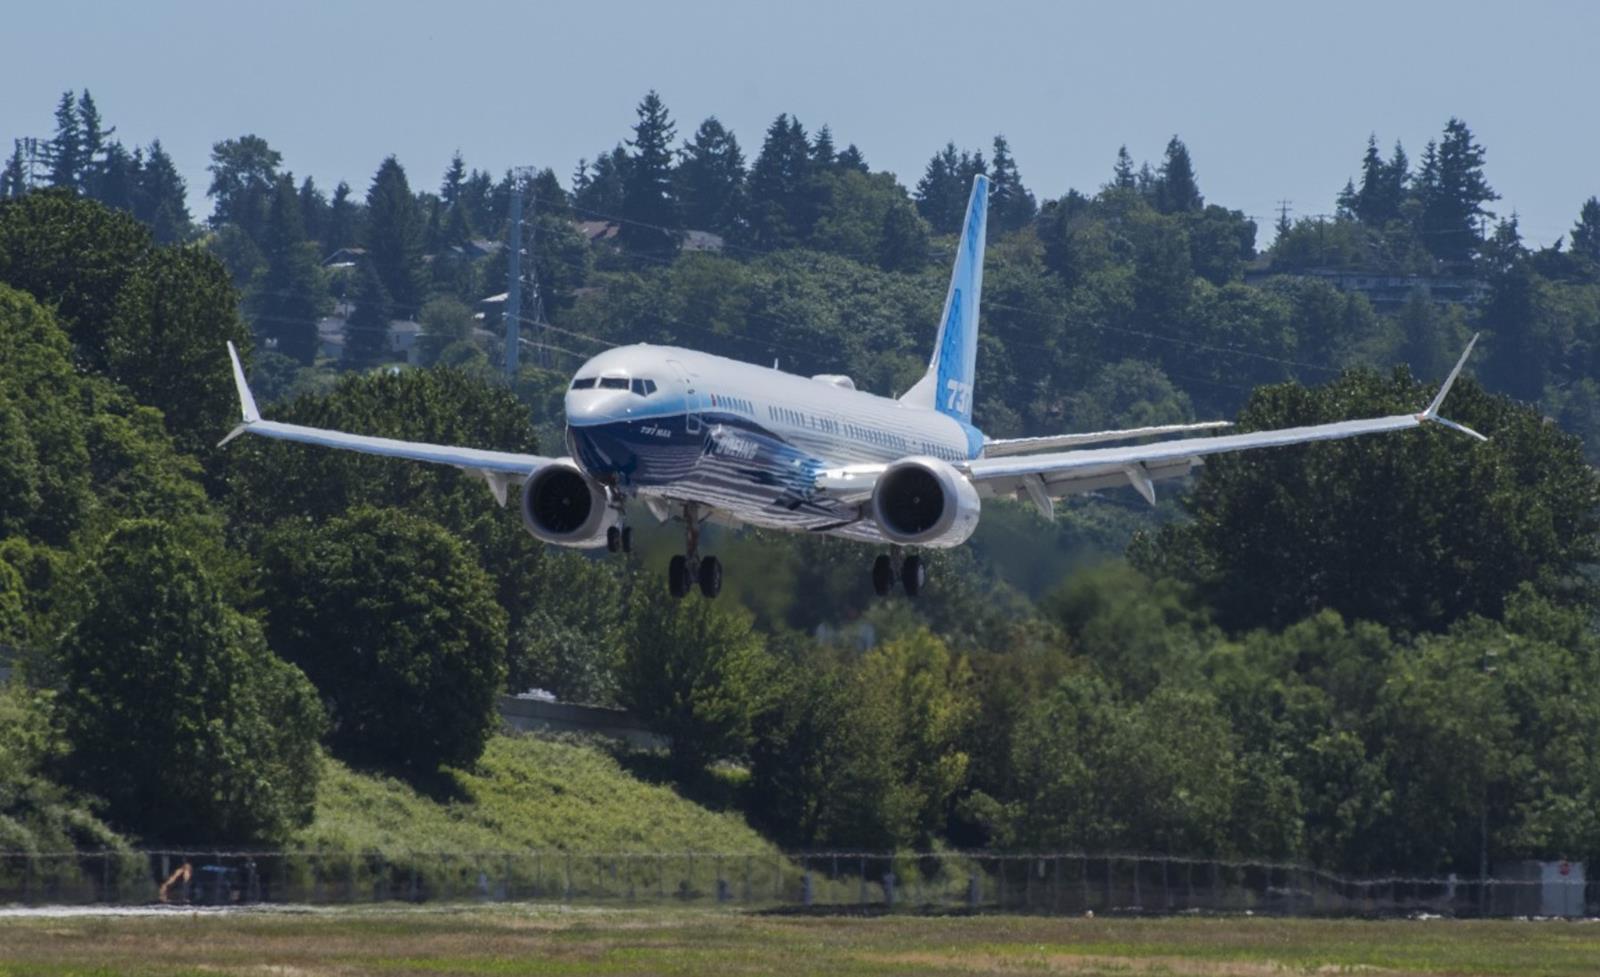 The new Boeing aircraft will also be in the Metaverse